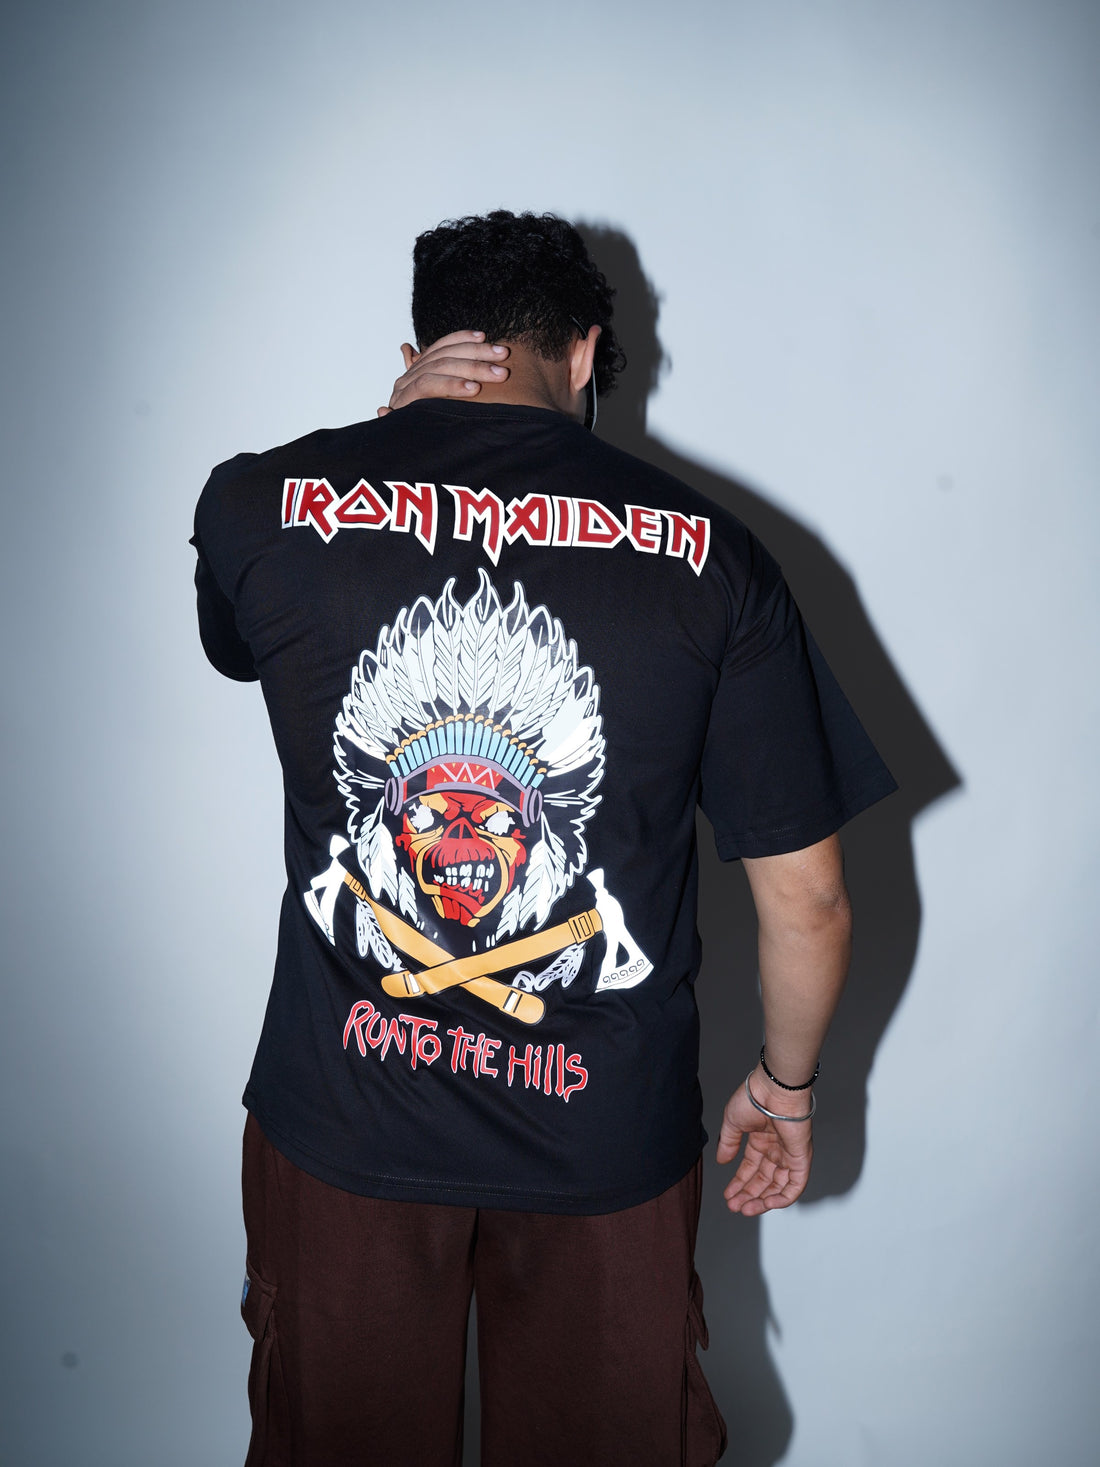 Run To the Hills (Reflective) - Iron Maiden Drop Sleeved  Tee For Men and Women